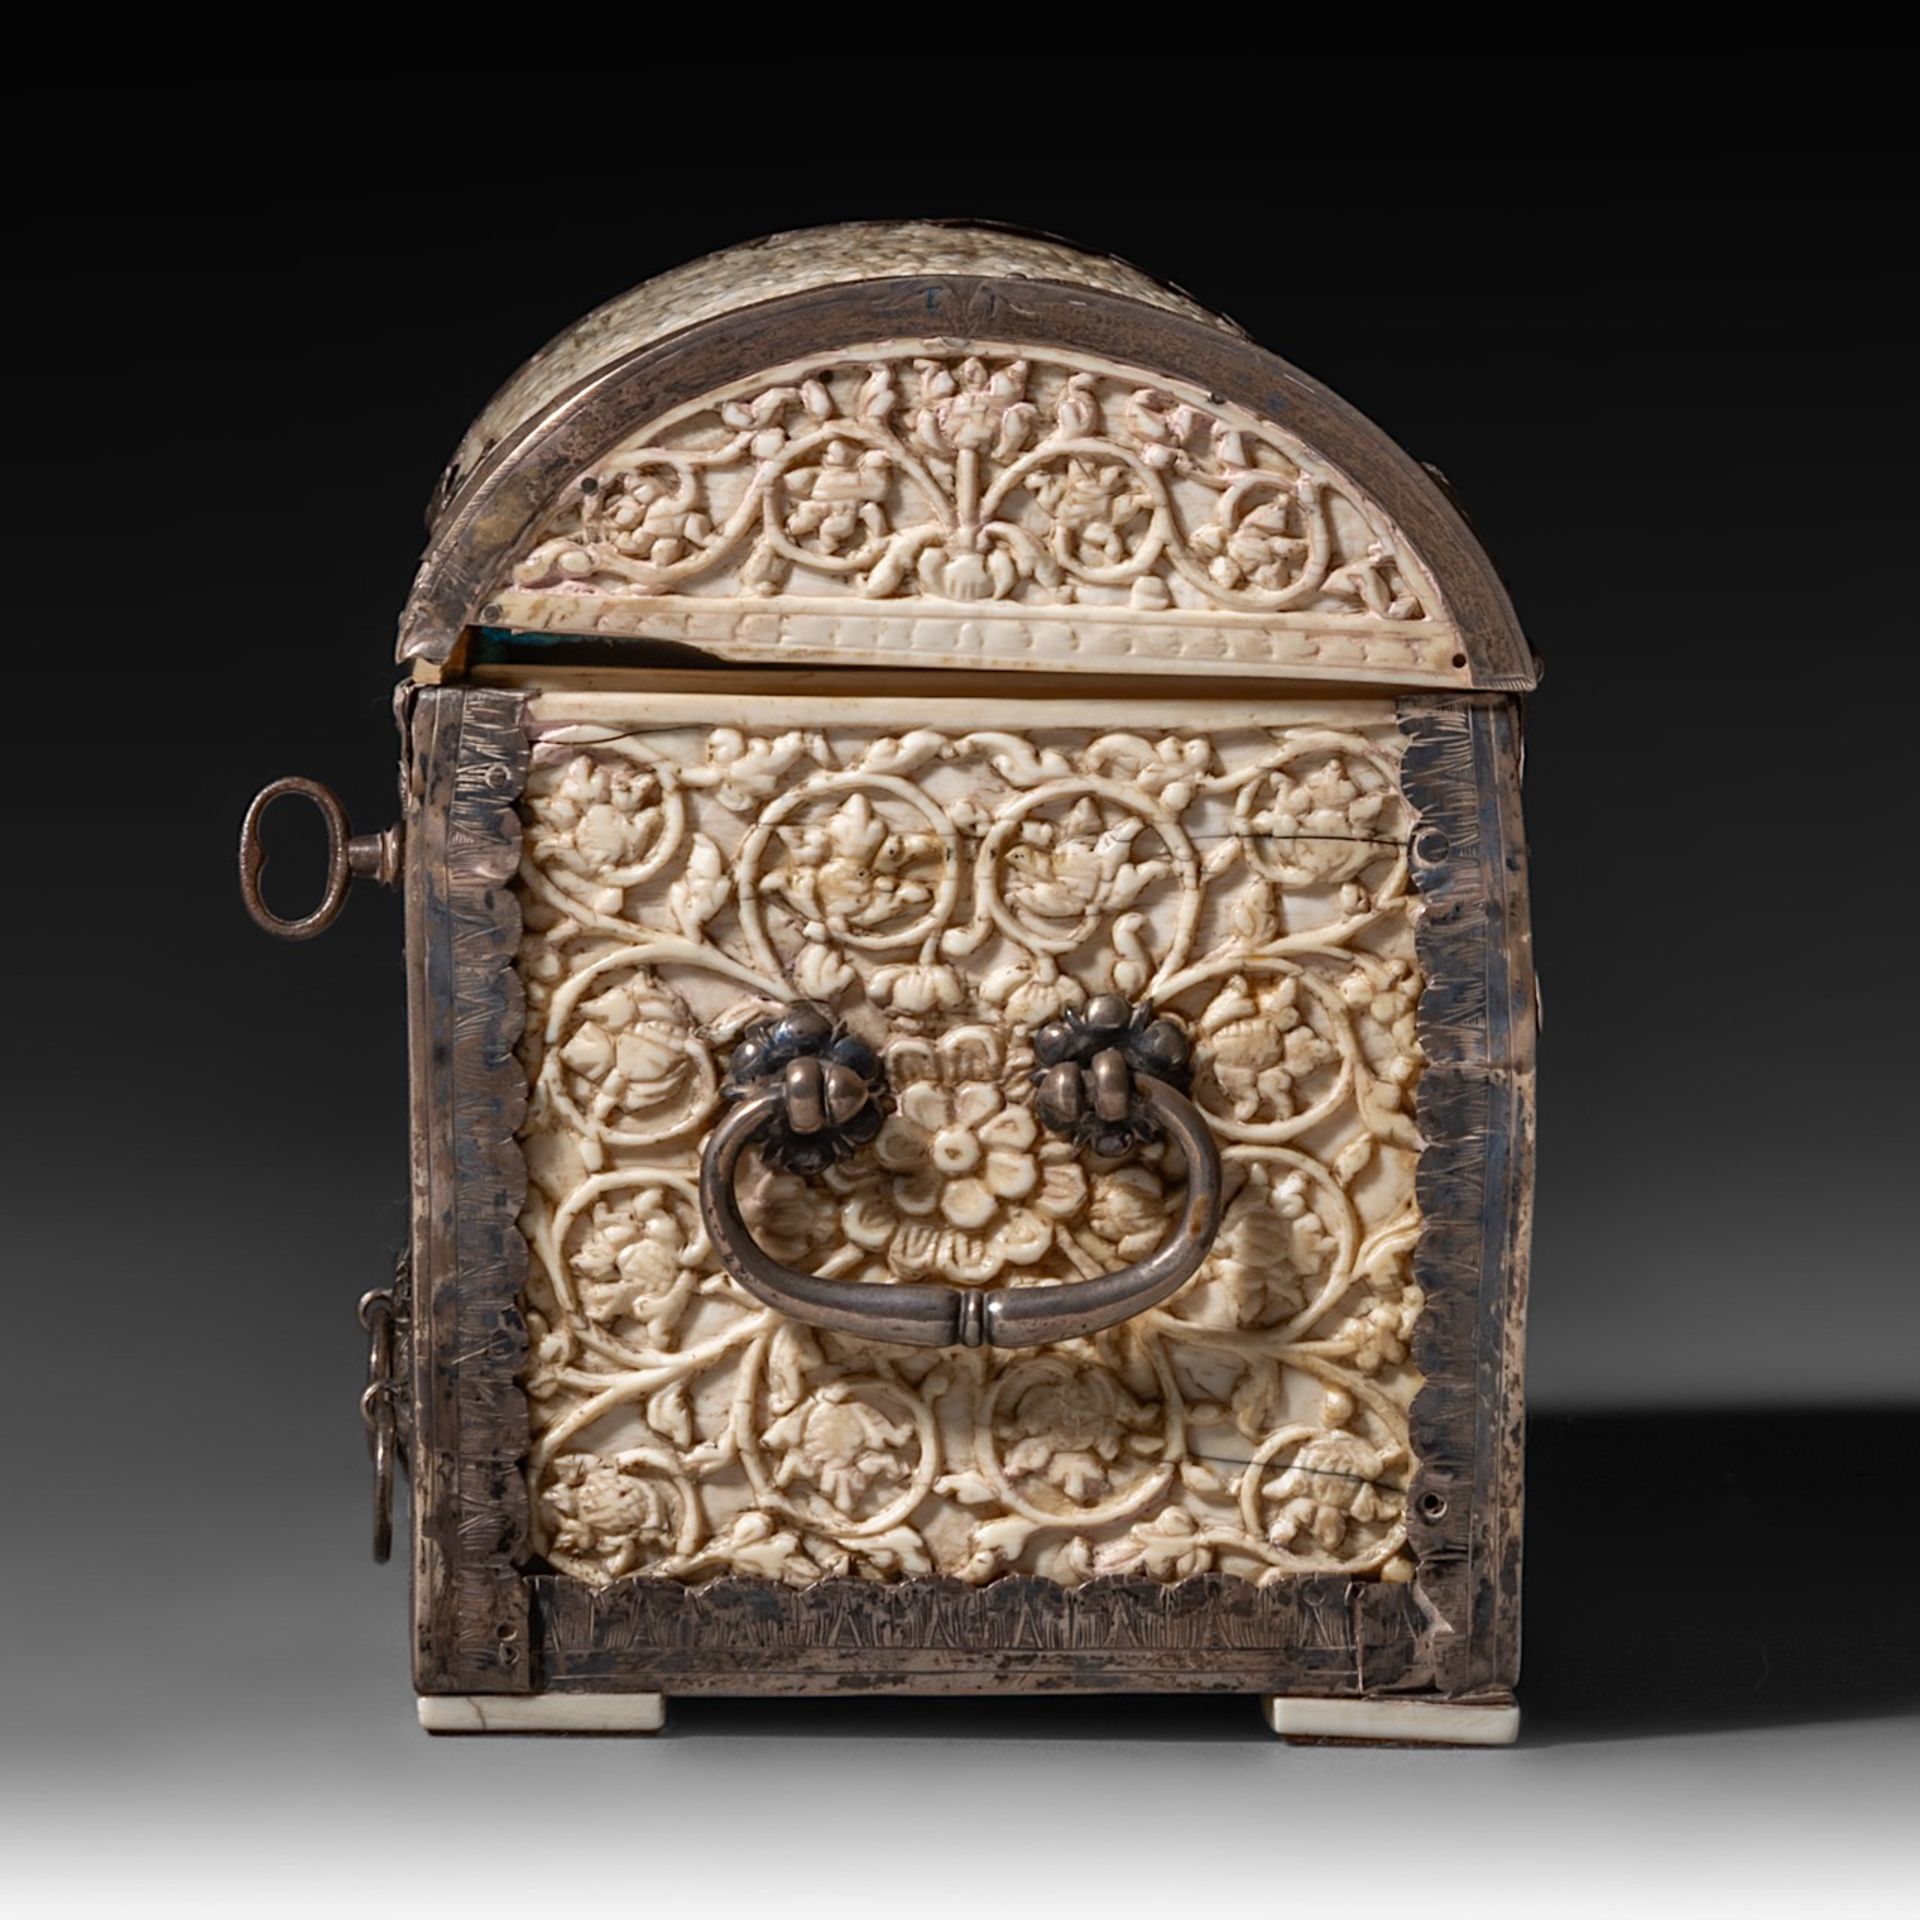 A 17th/18th-century Sinhalese (Sri Lanka) ivory jewelry casket, H 13,5 - W 19,3 - D 10,1 cm / total - Image 4 of 11